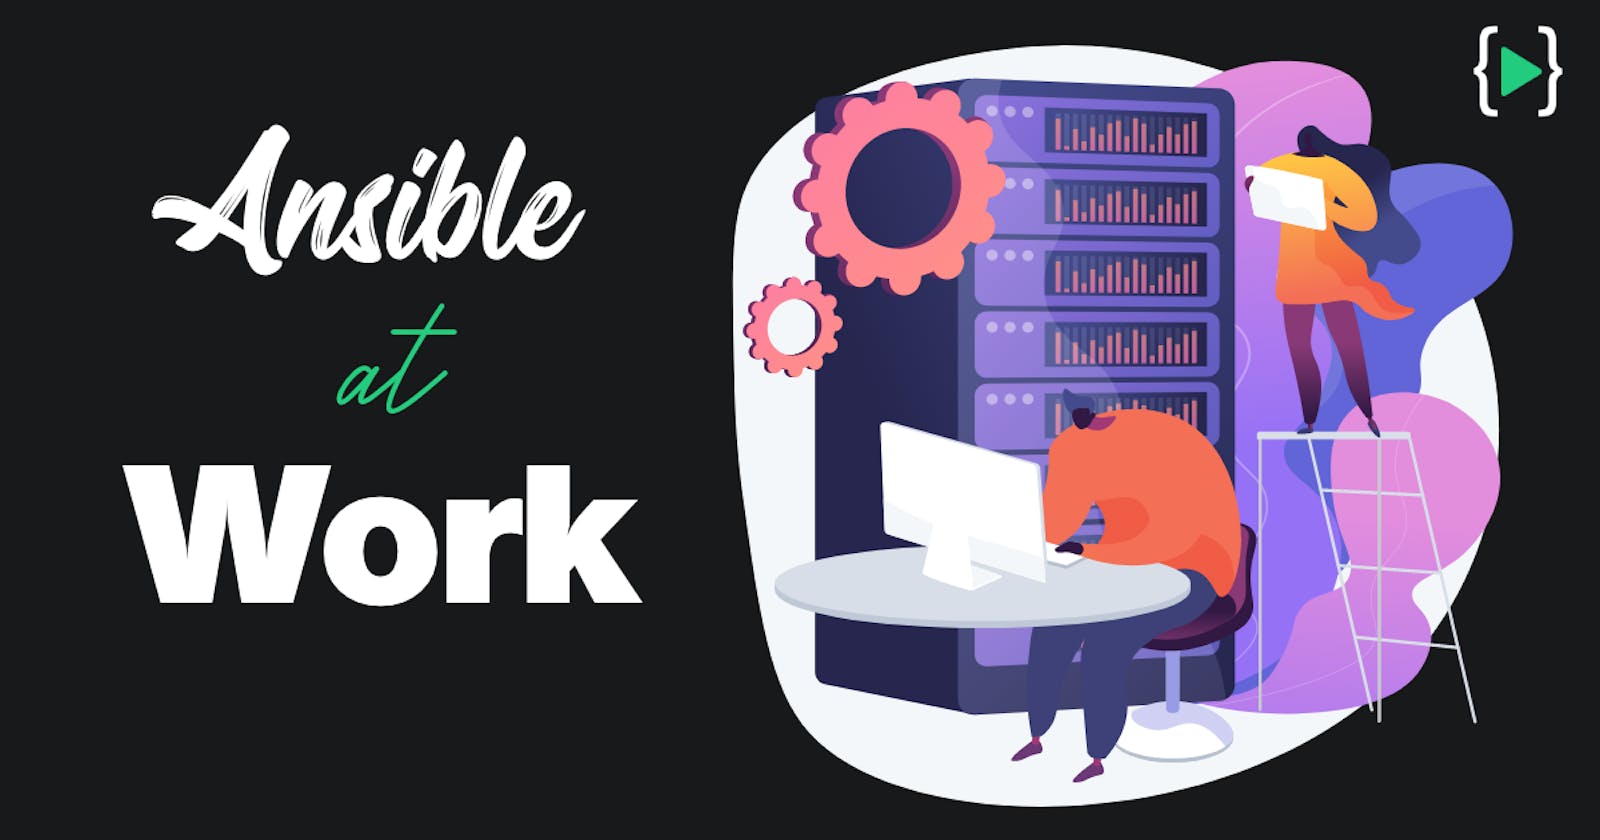 Ansible at Work - Patching Linux Servers